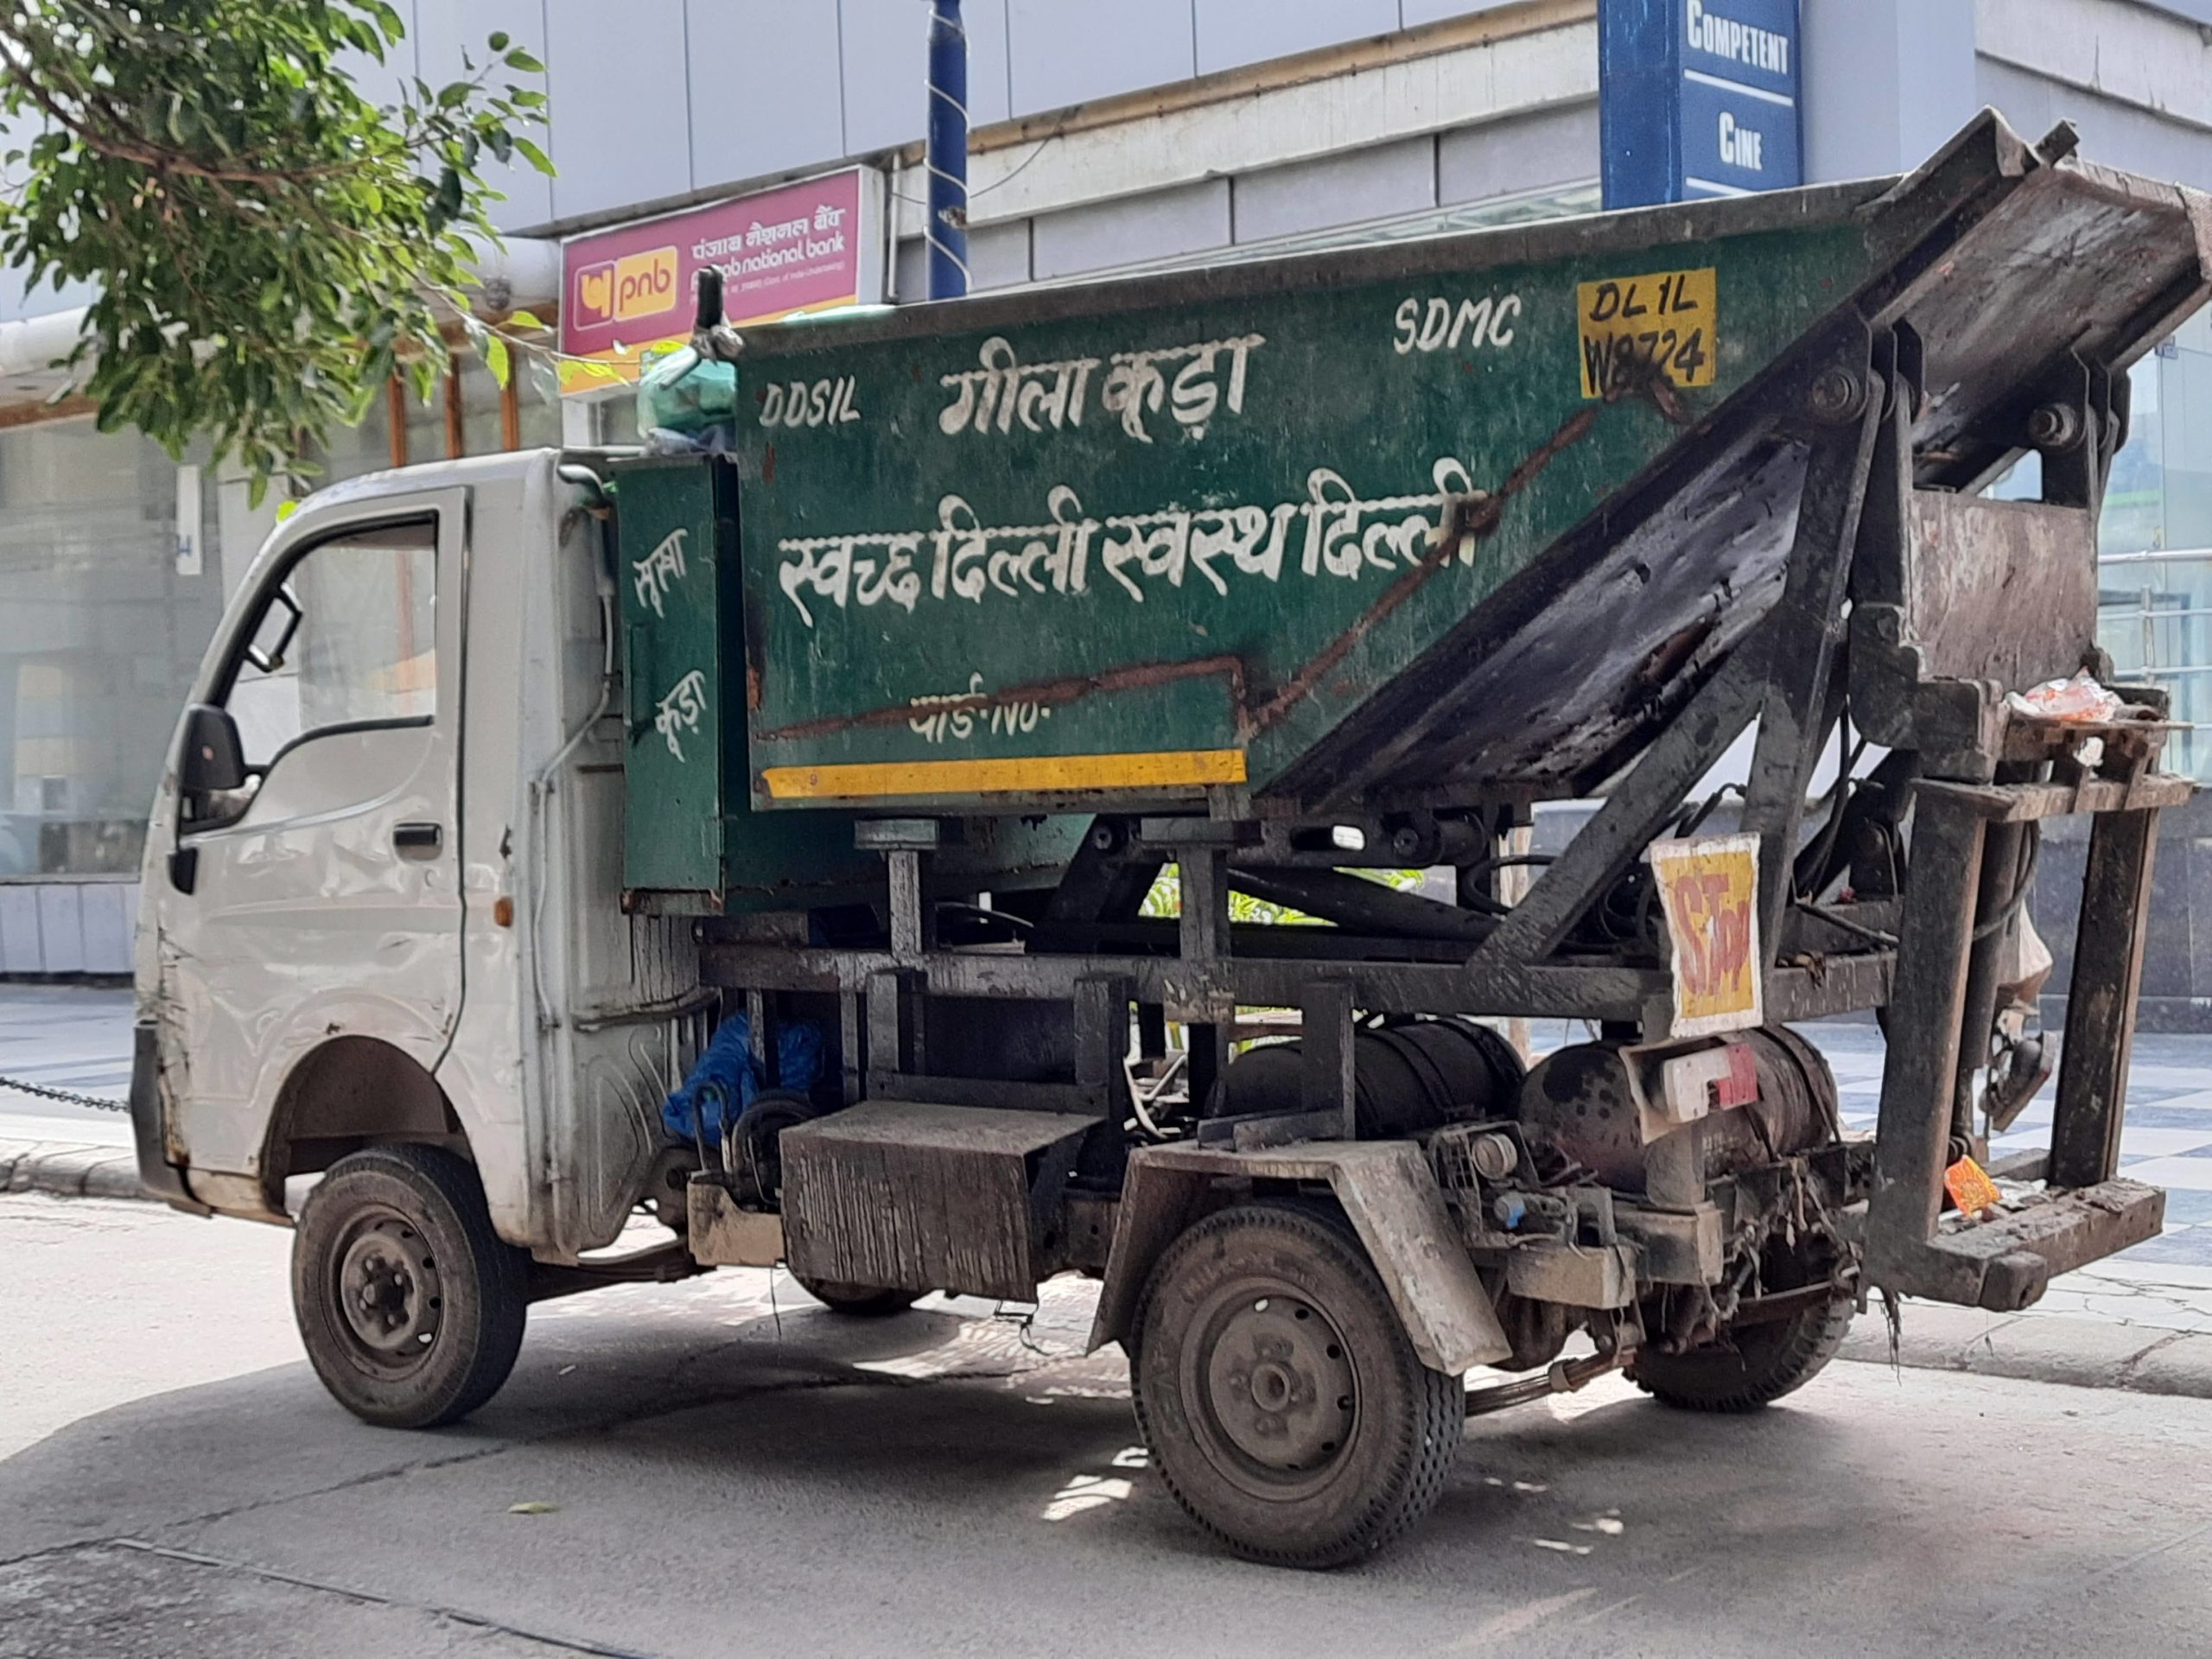 Delhi budget: Rs 850 cr for landfill clearance